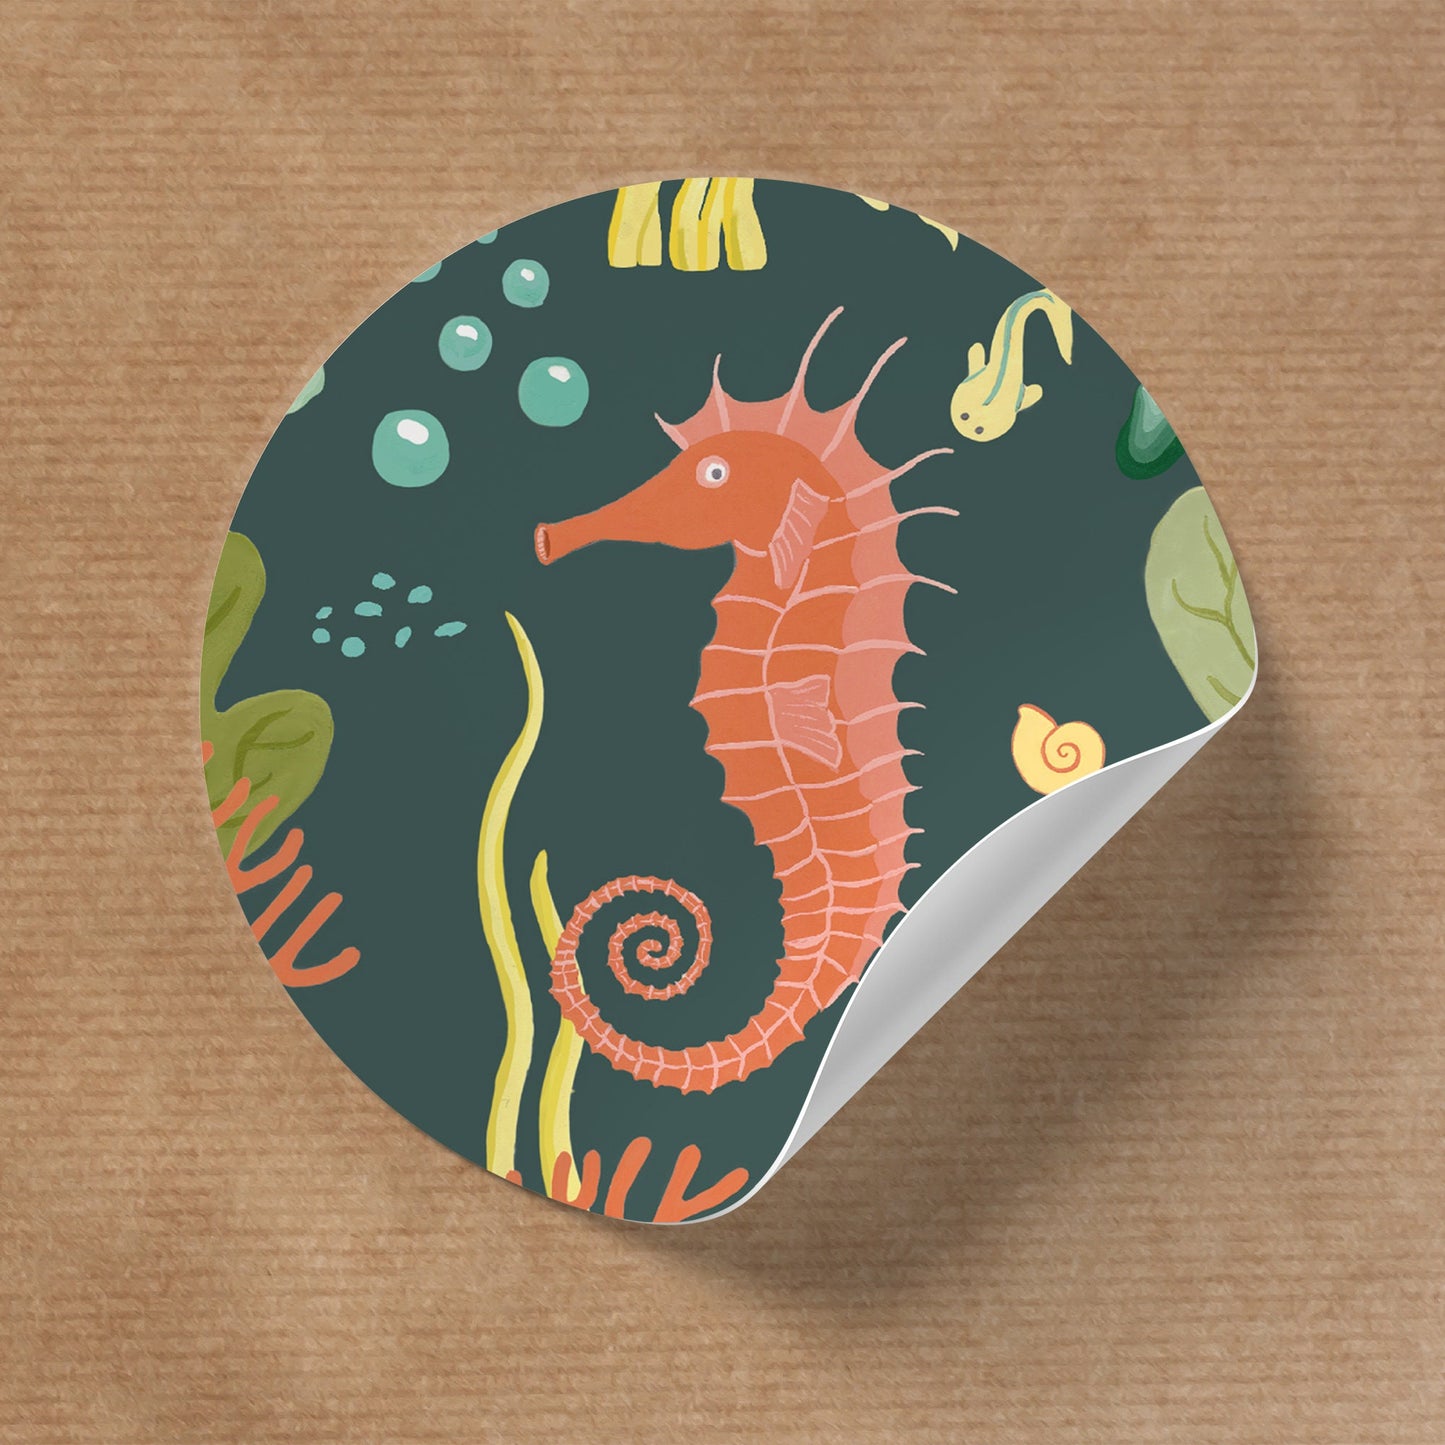 Bullet journal set "Seahorse" - Din A5 journal and 78 matching stickers